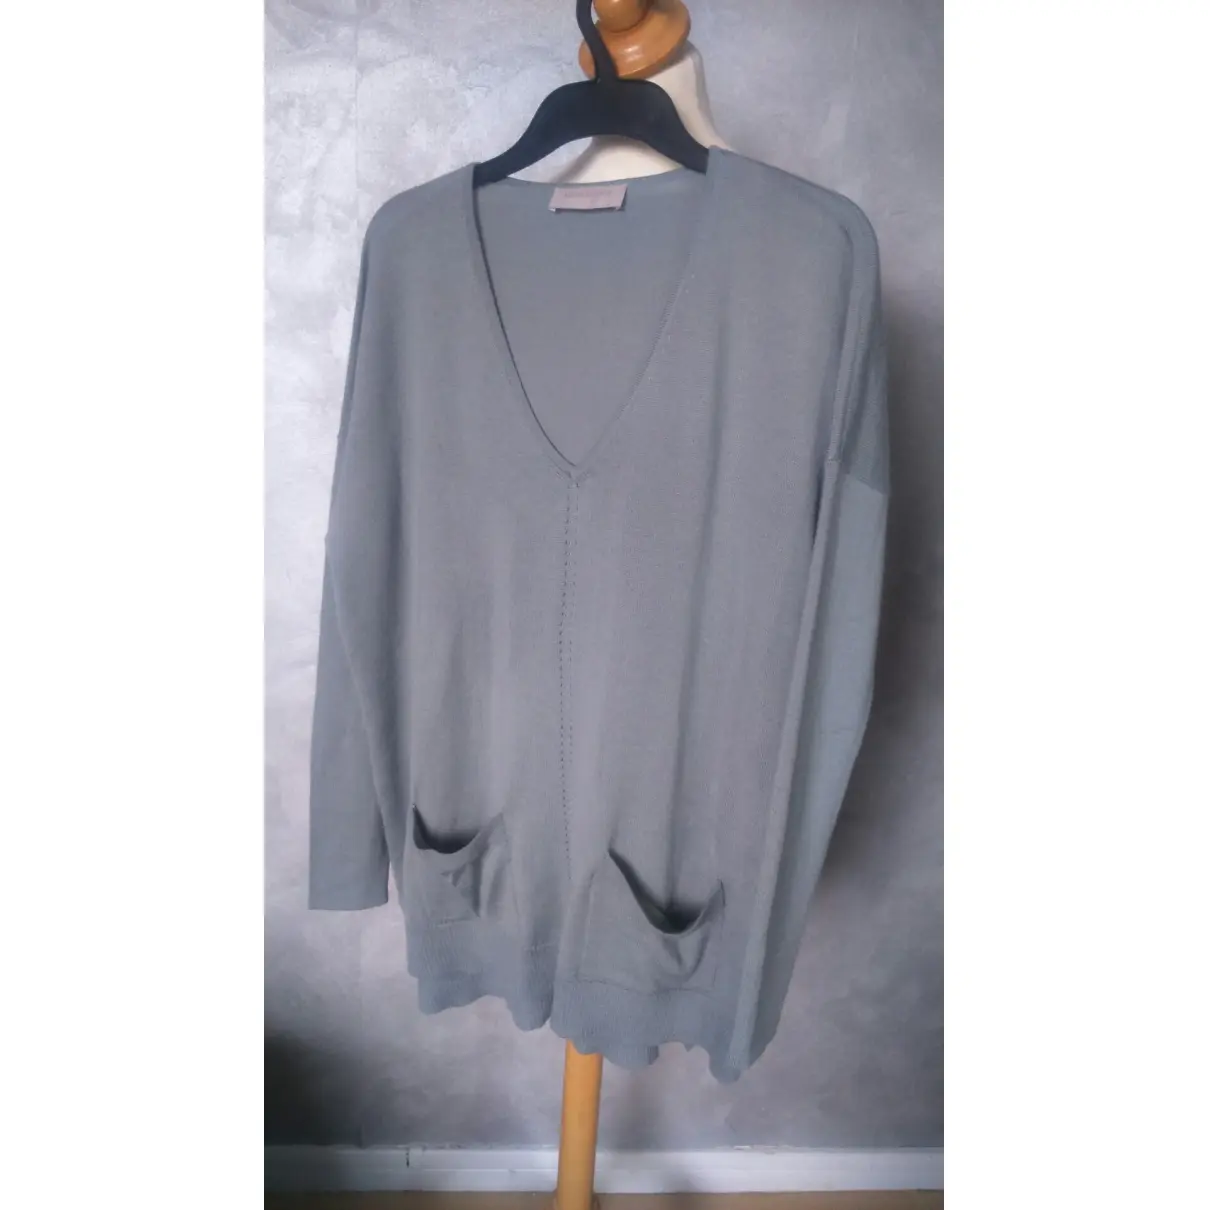 Georges Rech Wool jumper for sale